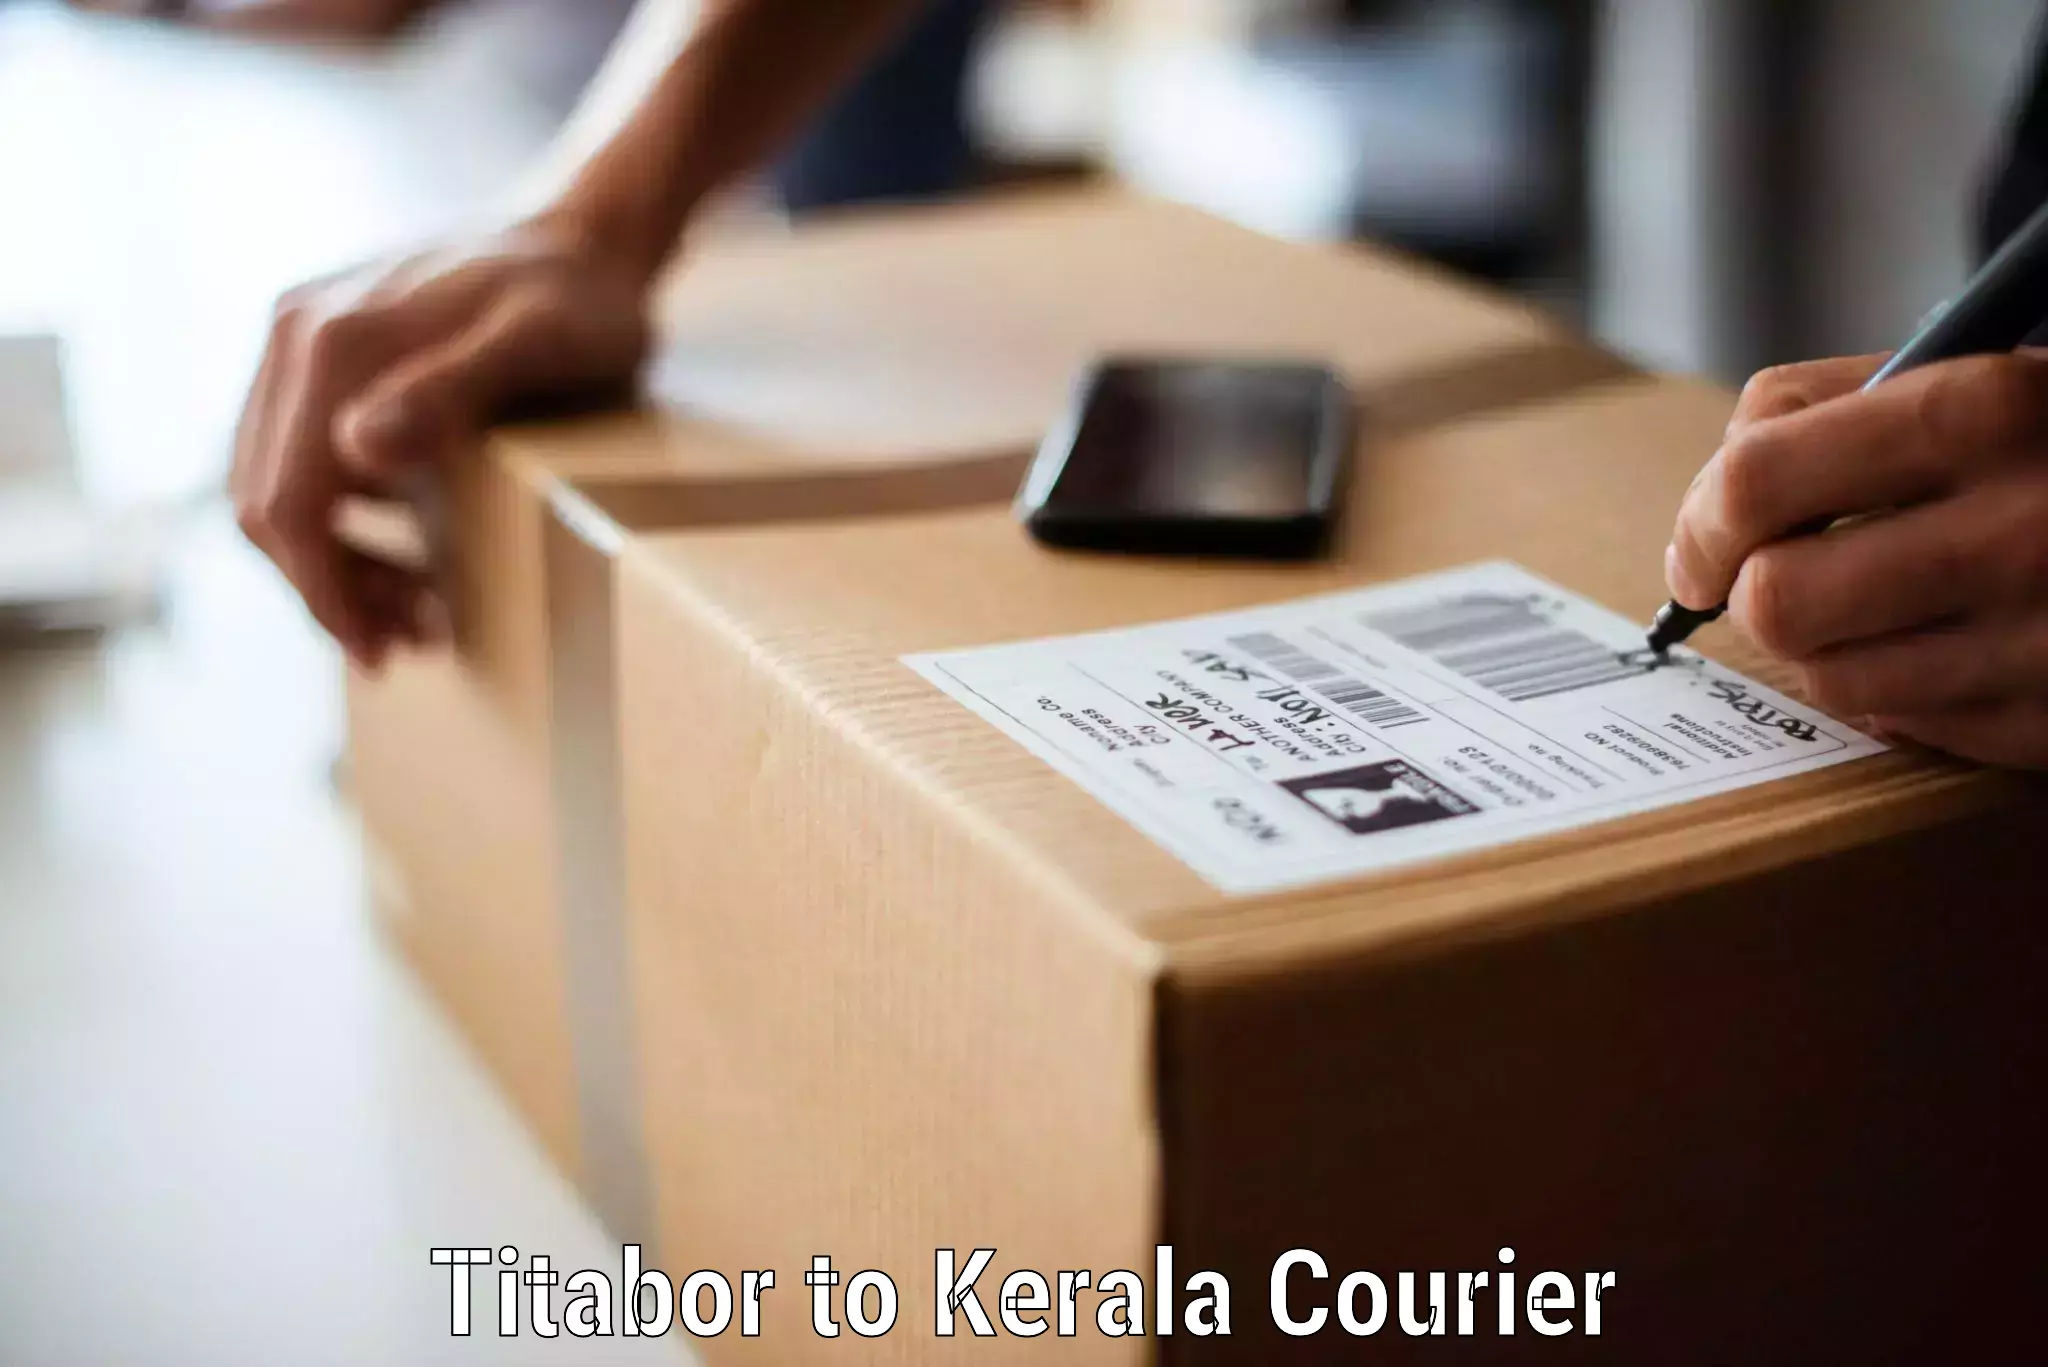 Budget-friendly moving services Titabor to Kerala